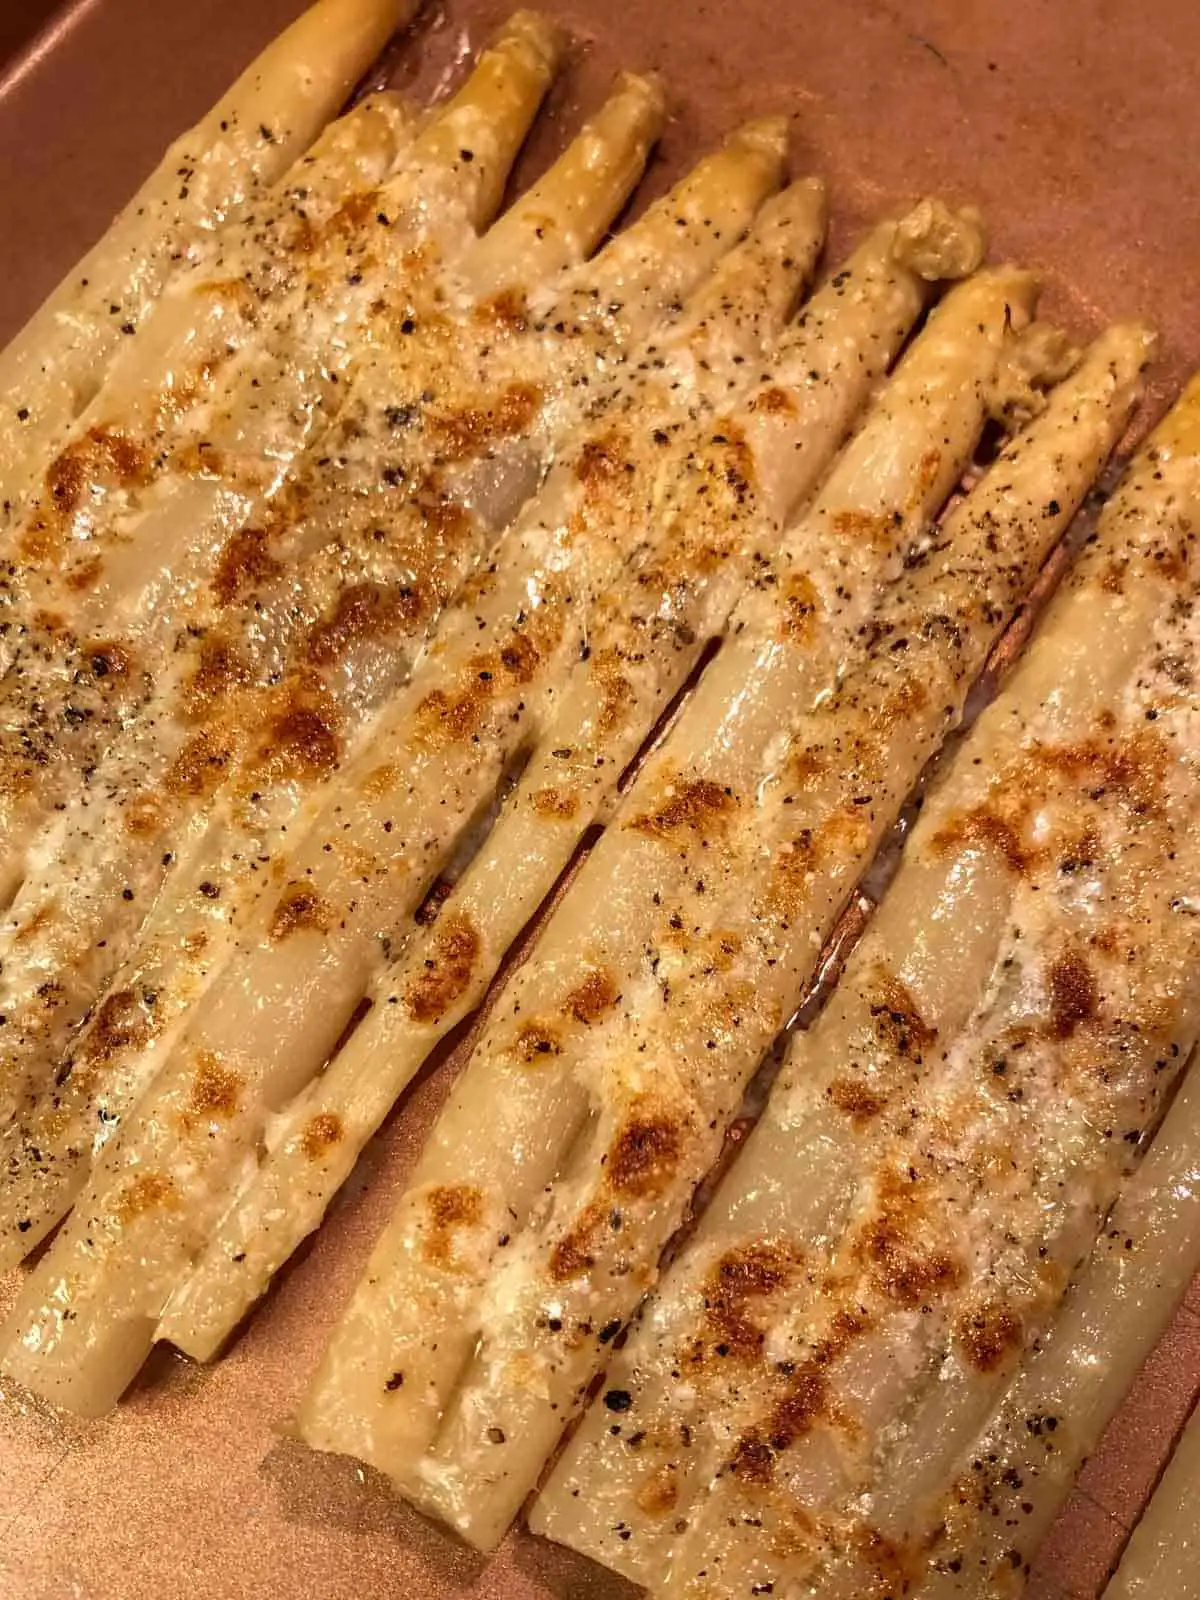 White asparagus in a roasting tray which was broiled and has browned melted cheese on top.